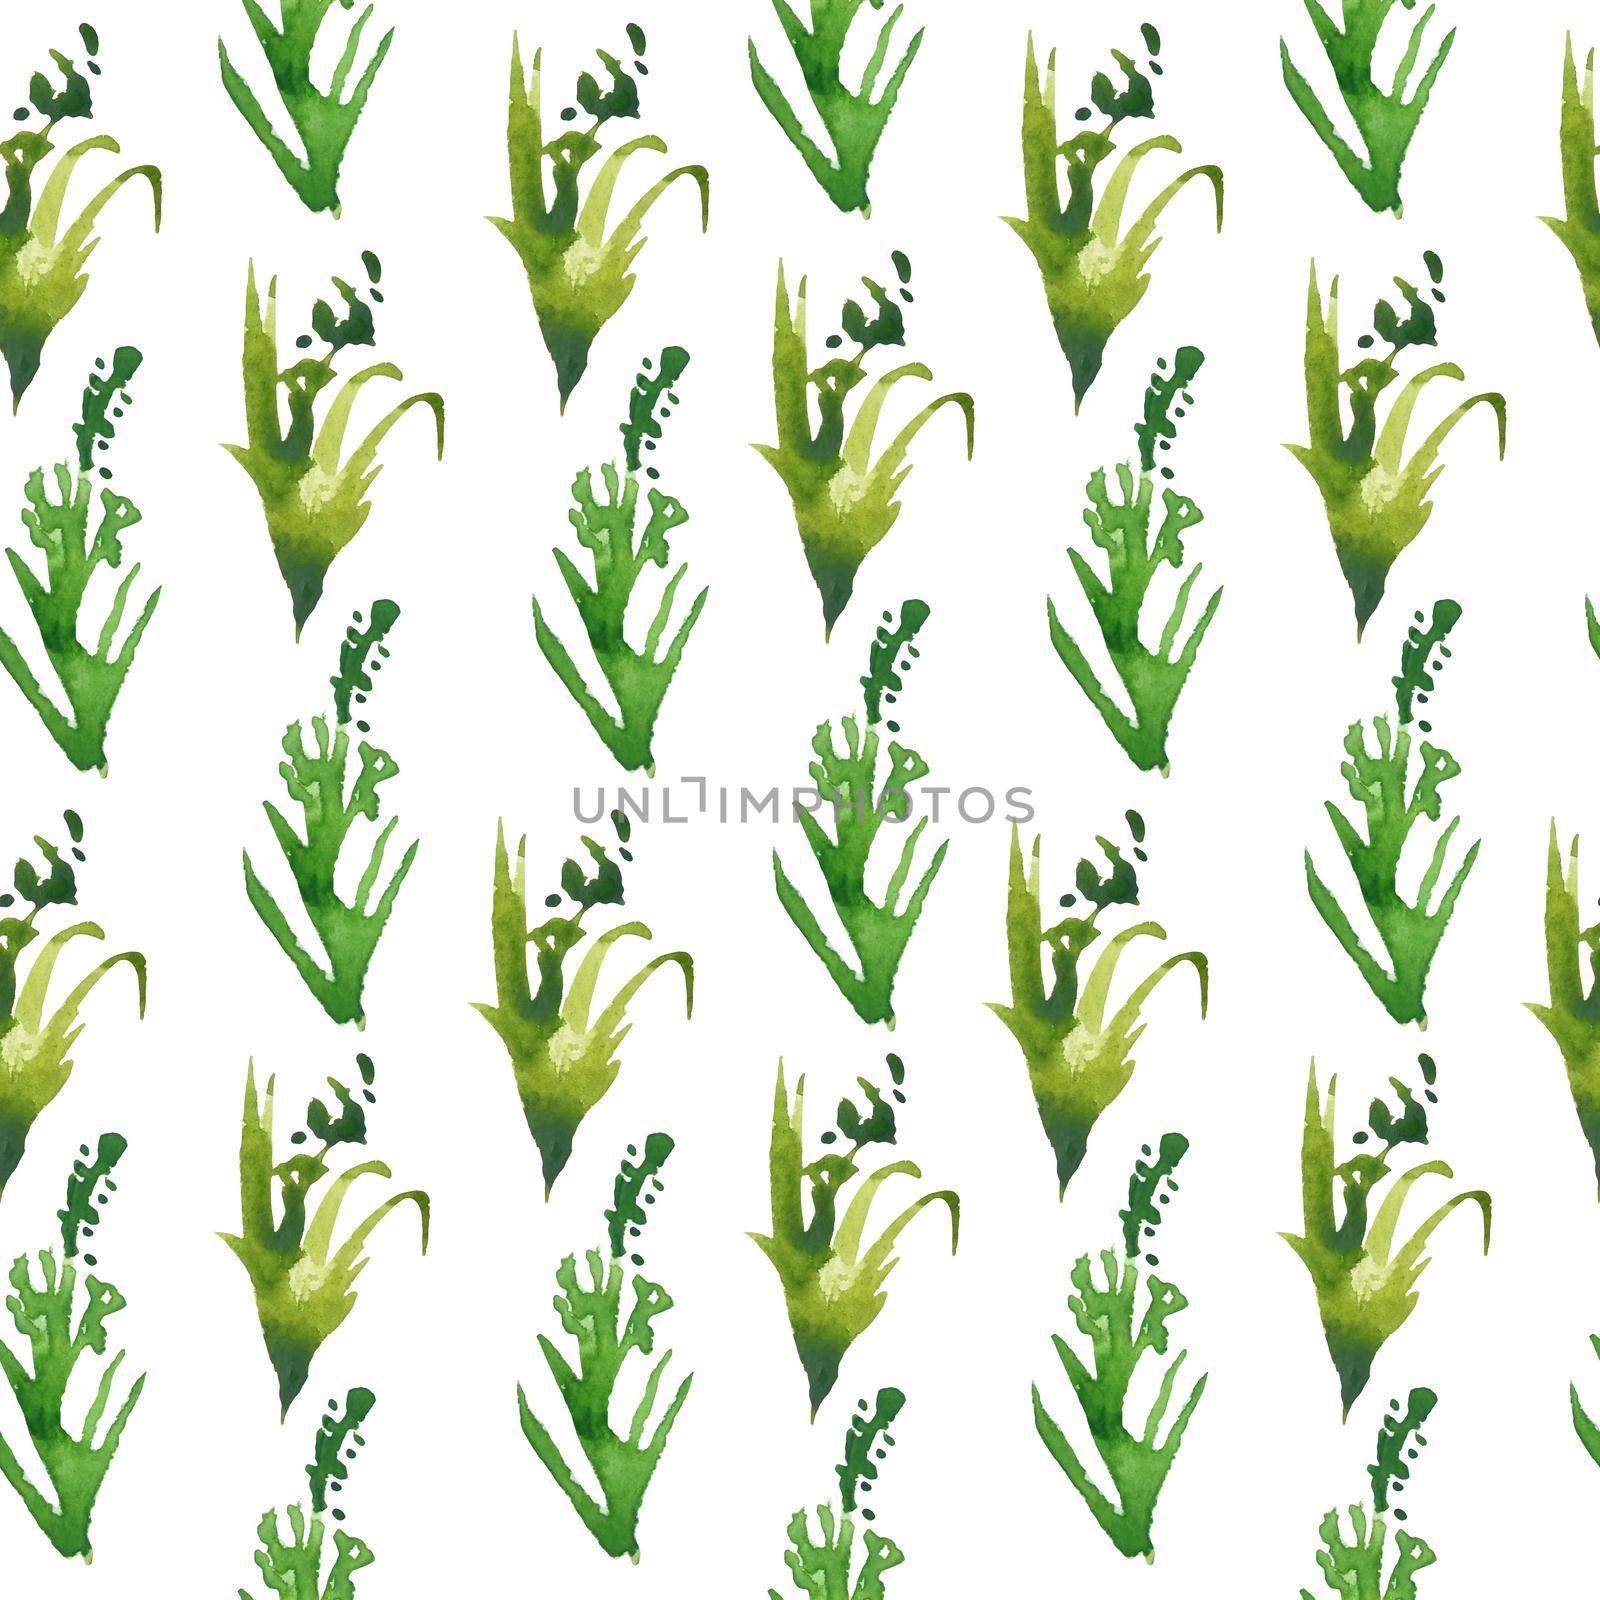 Seamless hand drawn watercolor pattern with green wild herbs flowers leaves in wood woodland forest. Organic natural plants, floral botanical design for wallpapers textile wrapping paper. Vintage boho